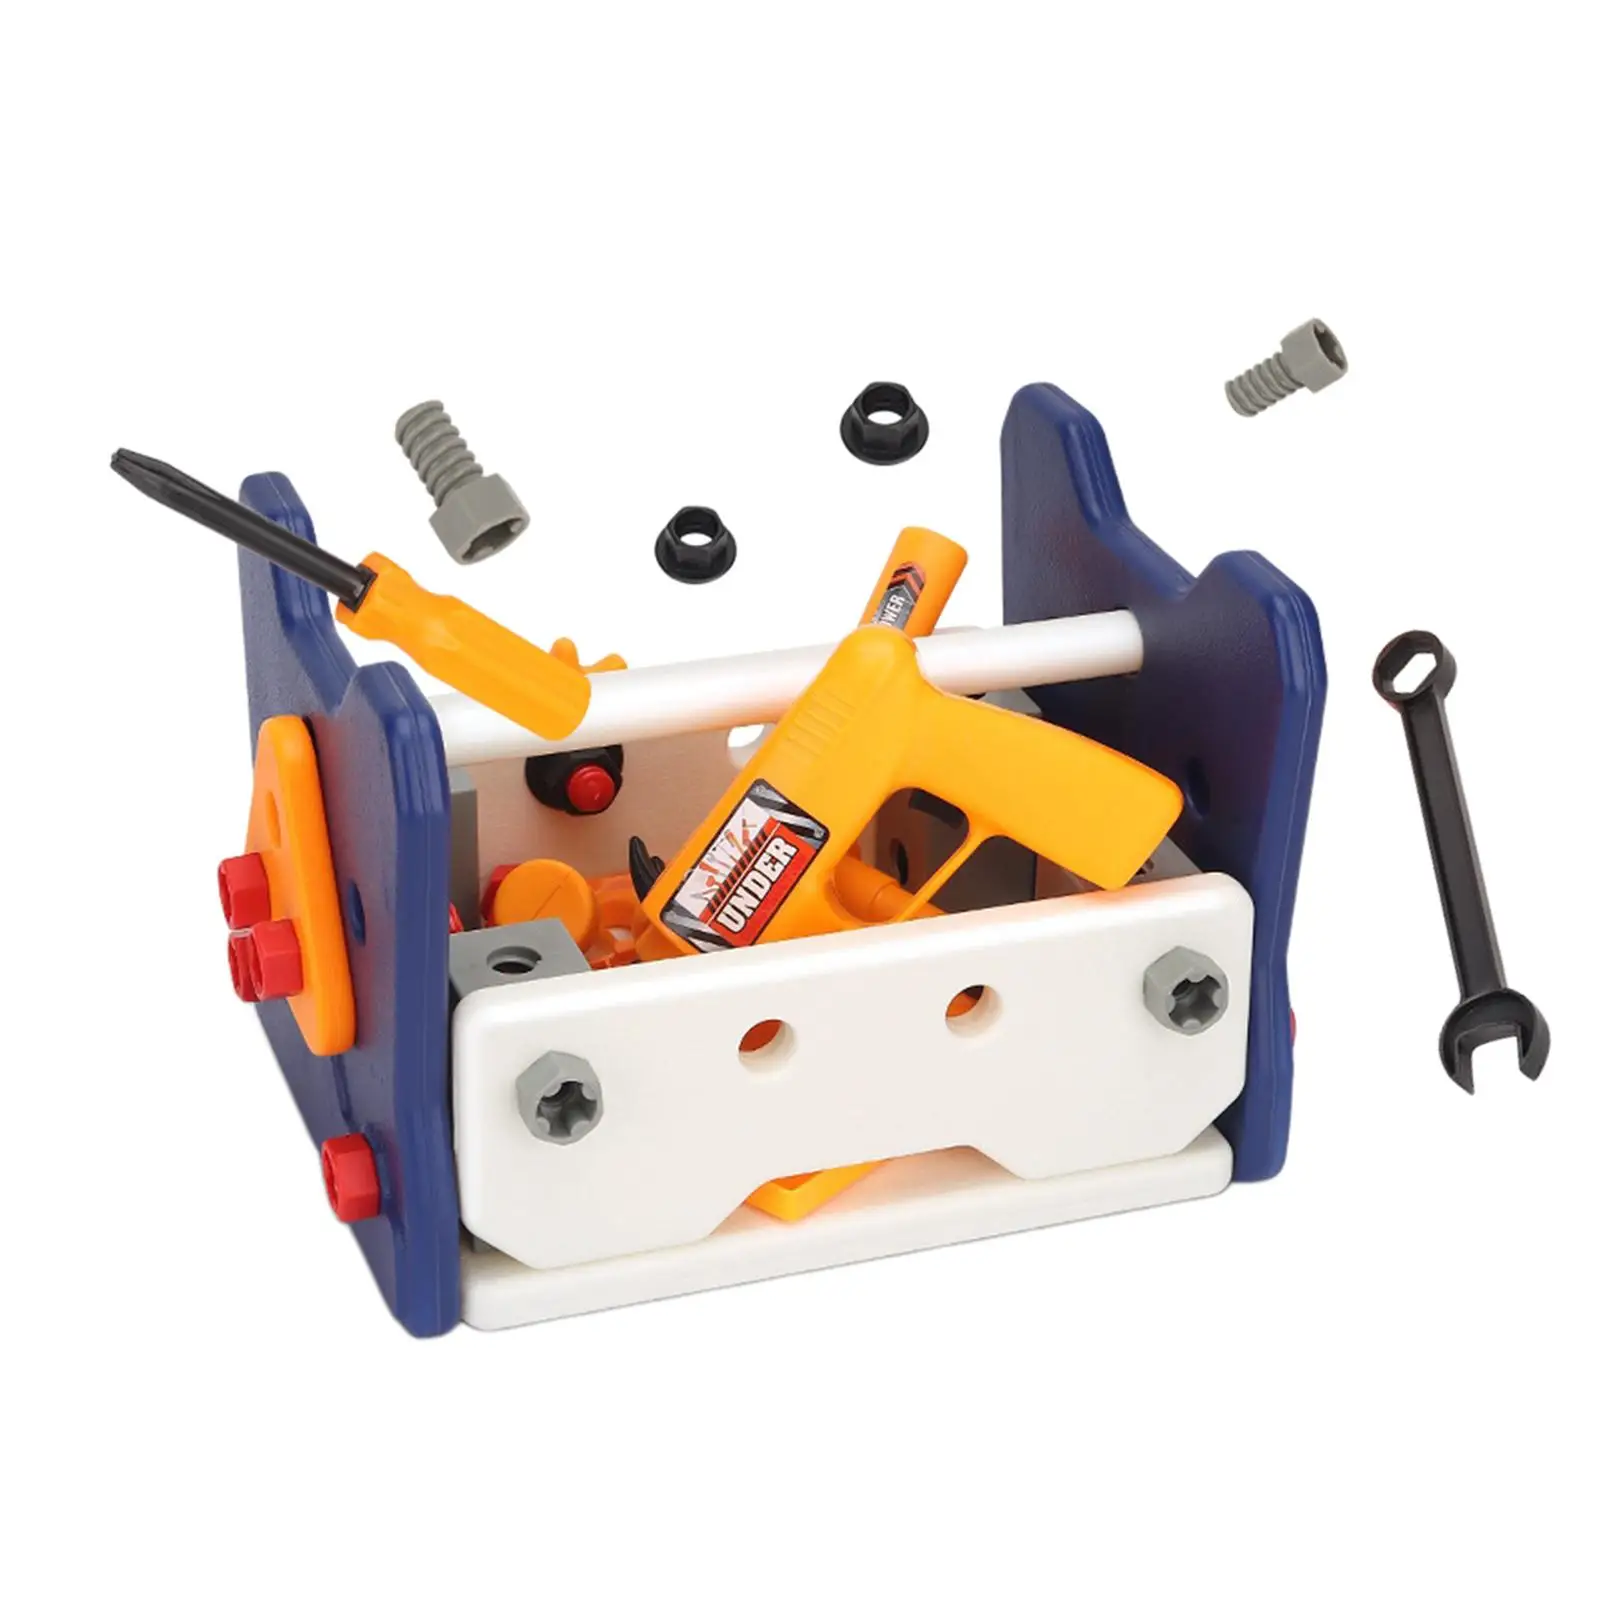 Toolbox Pretend Play Set Screw Disassembly Toy Montessori for Holiday Gifts